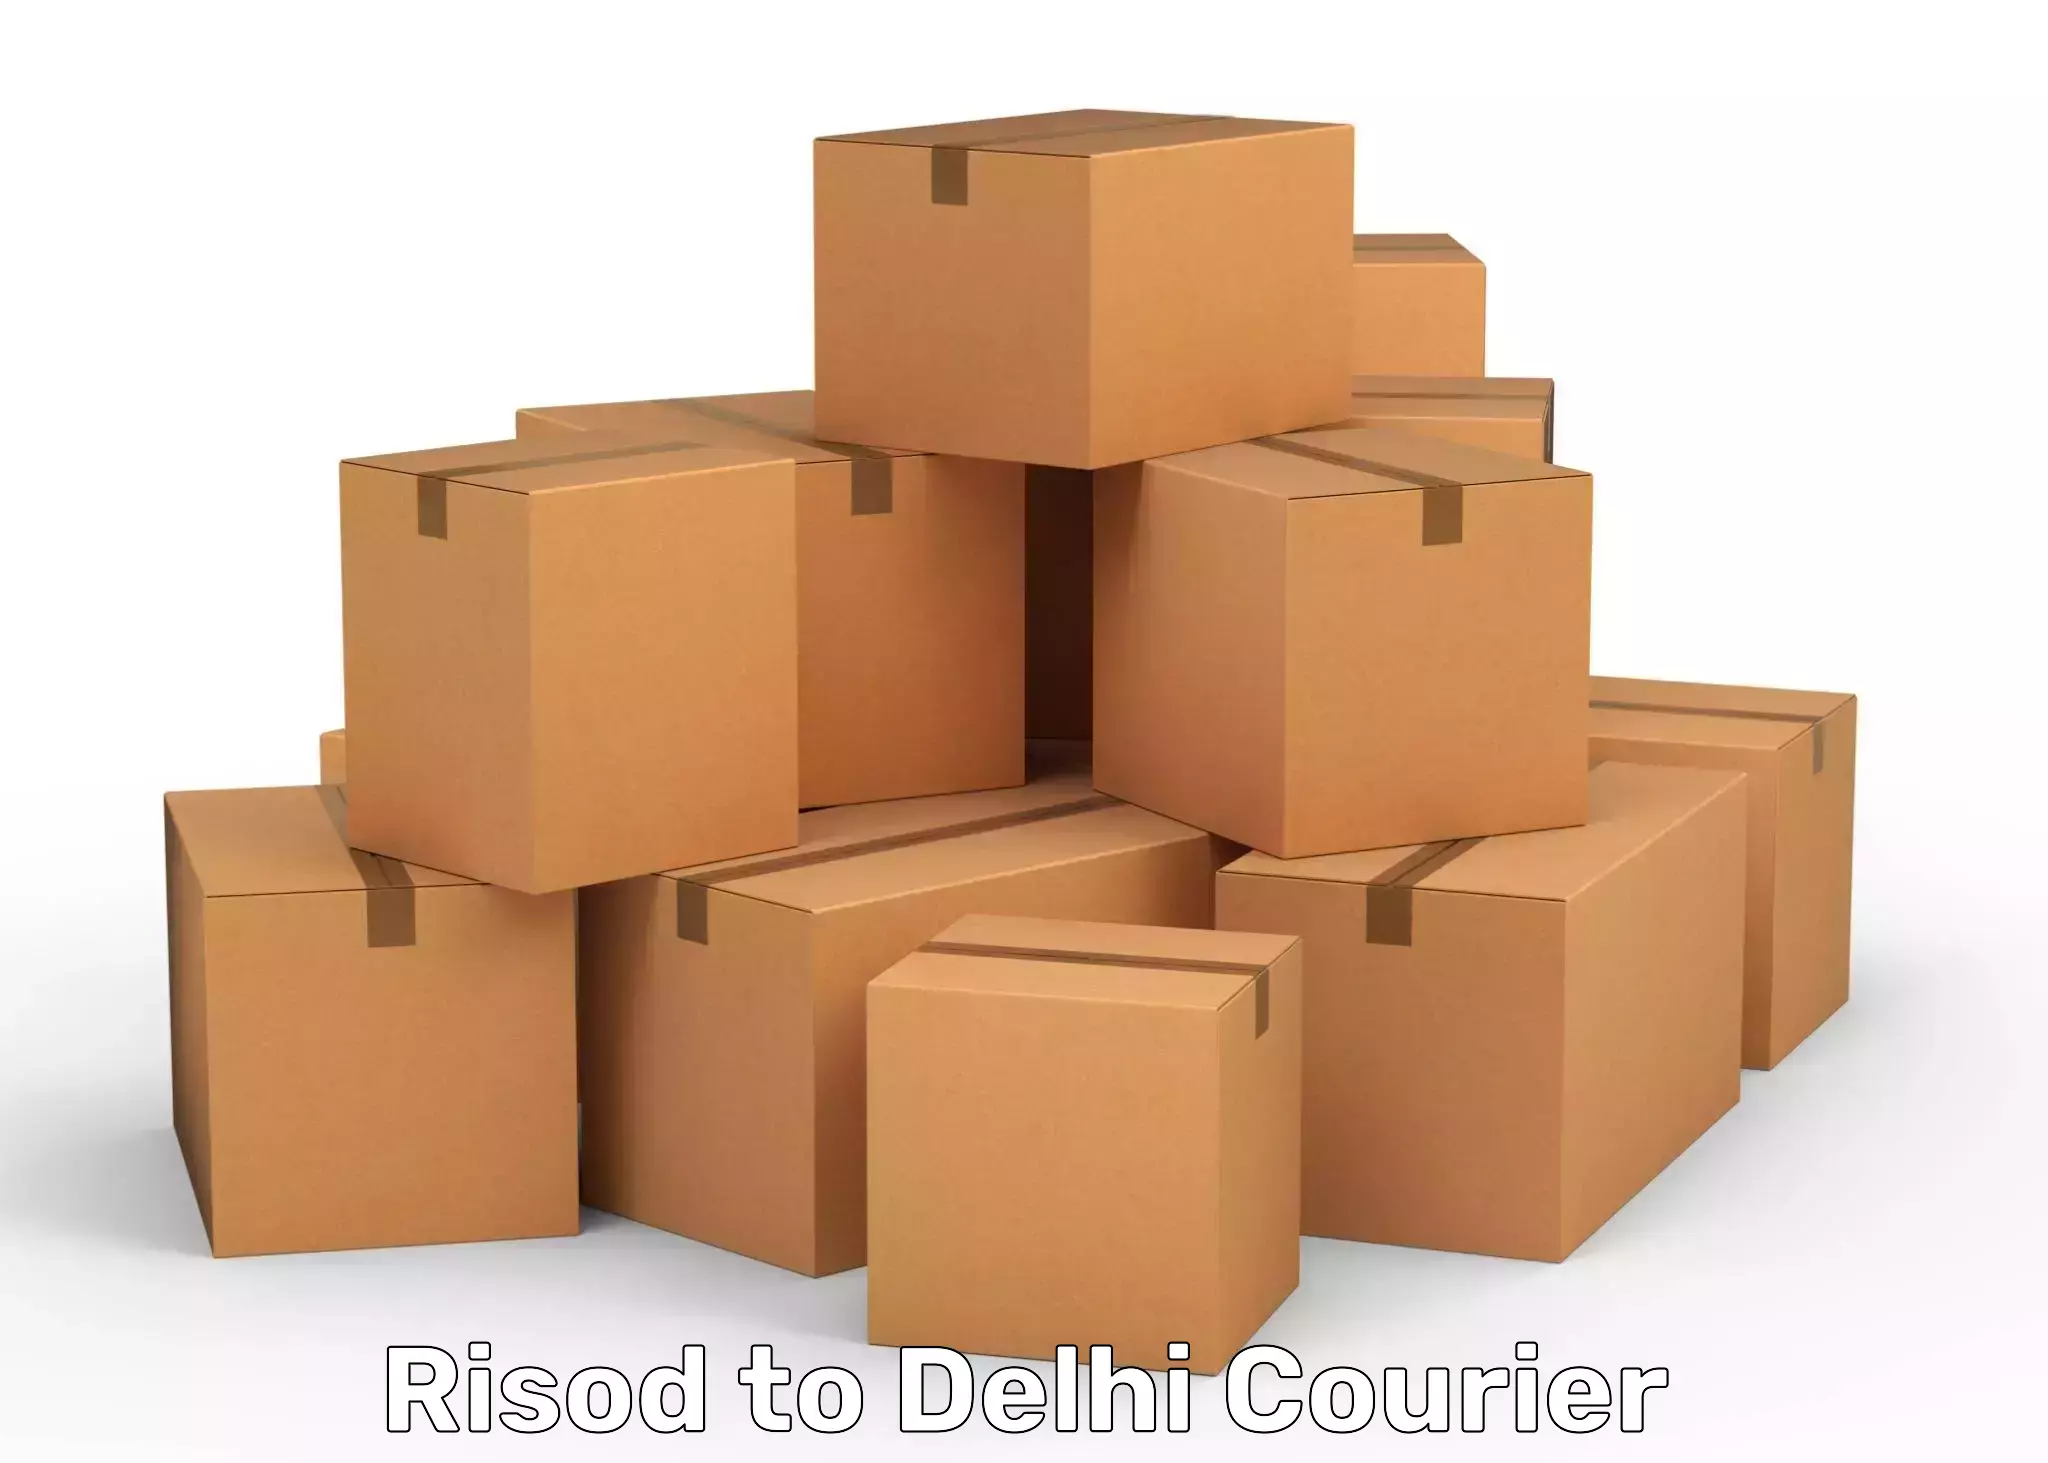 Modern delivery technologies Risod to University of Delhi